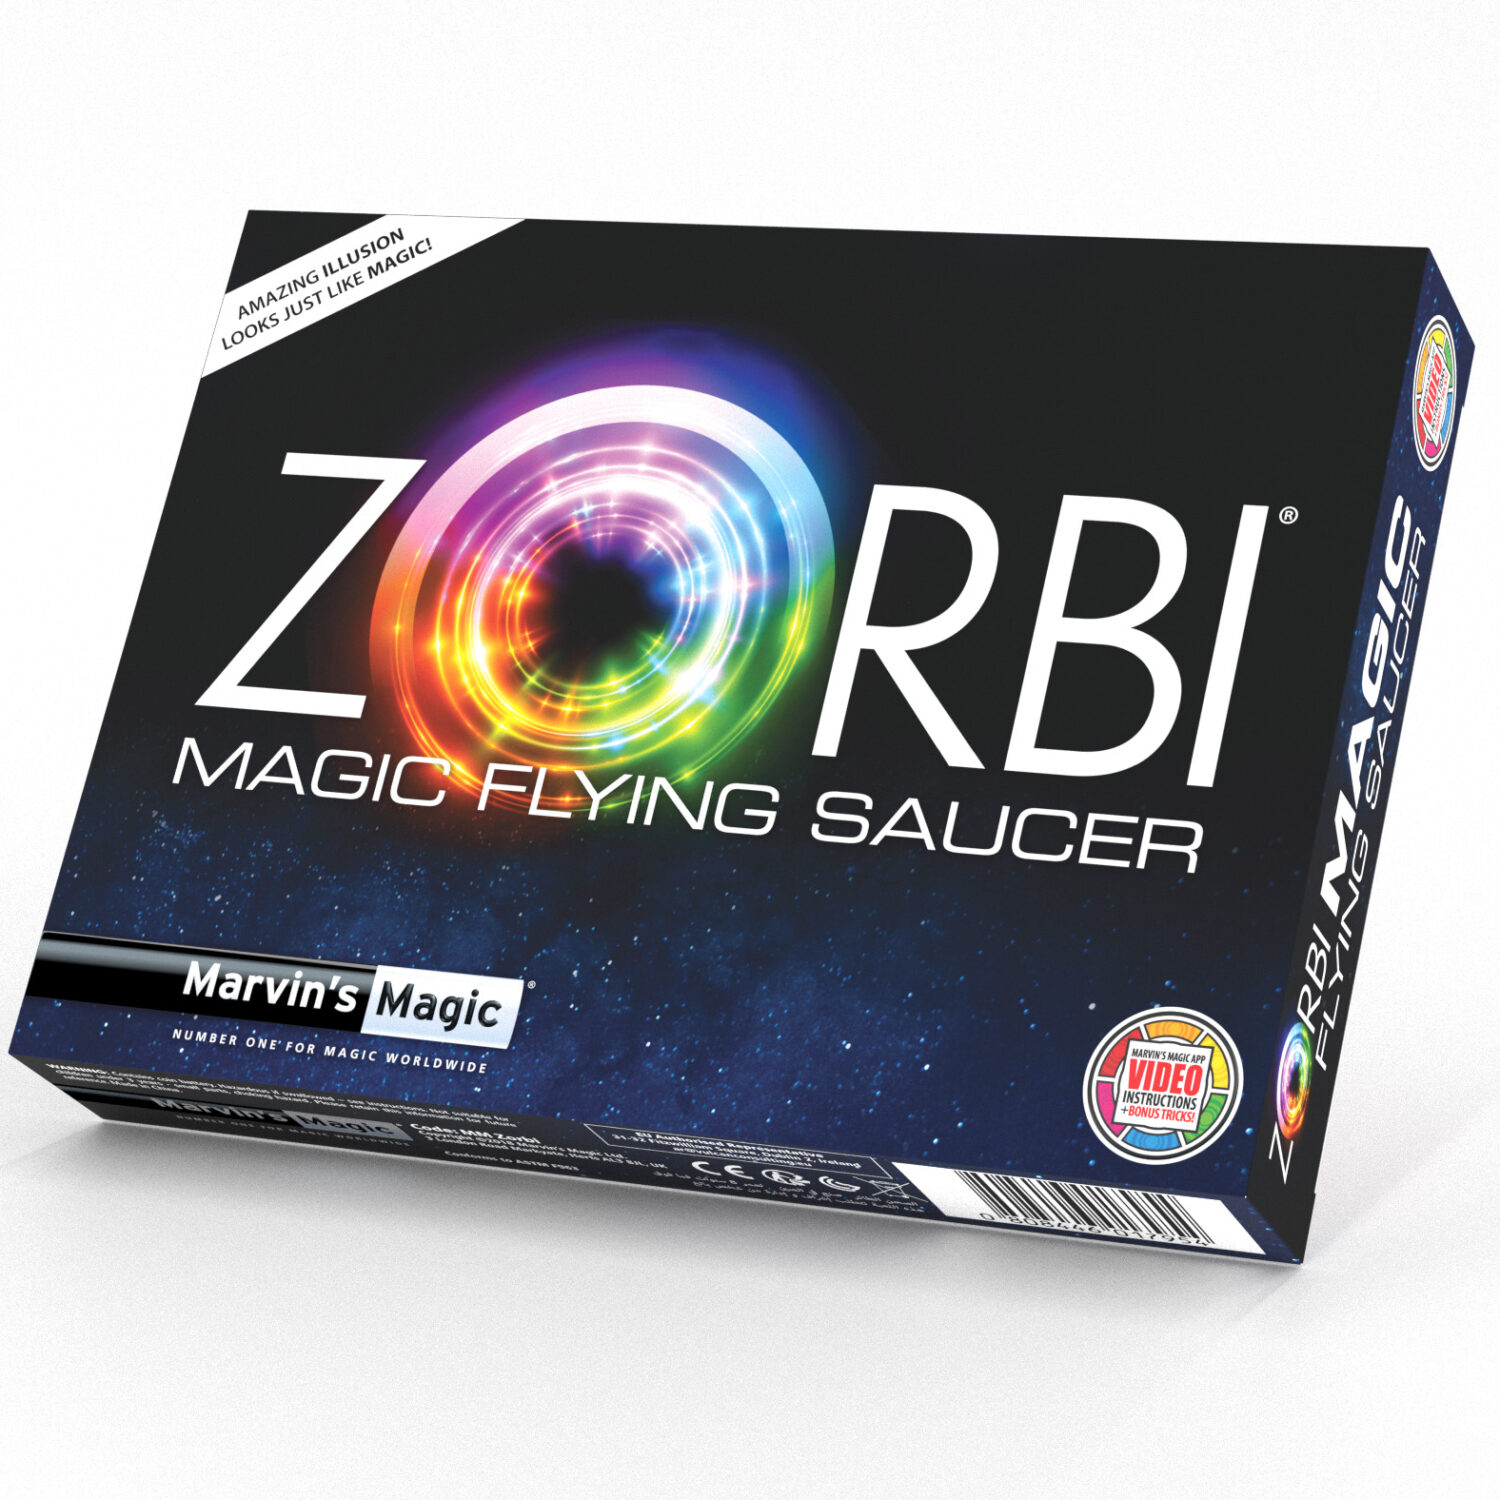 Zorbi Magic Flying Saucer by Marvins Magic